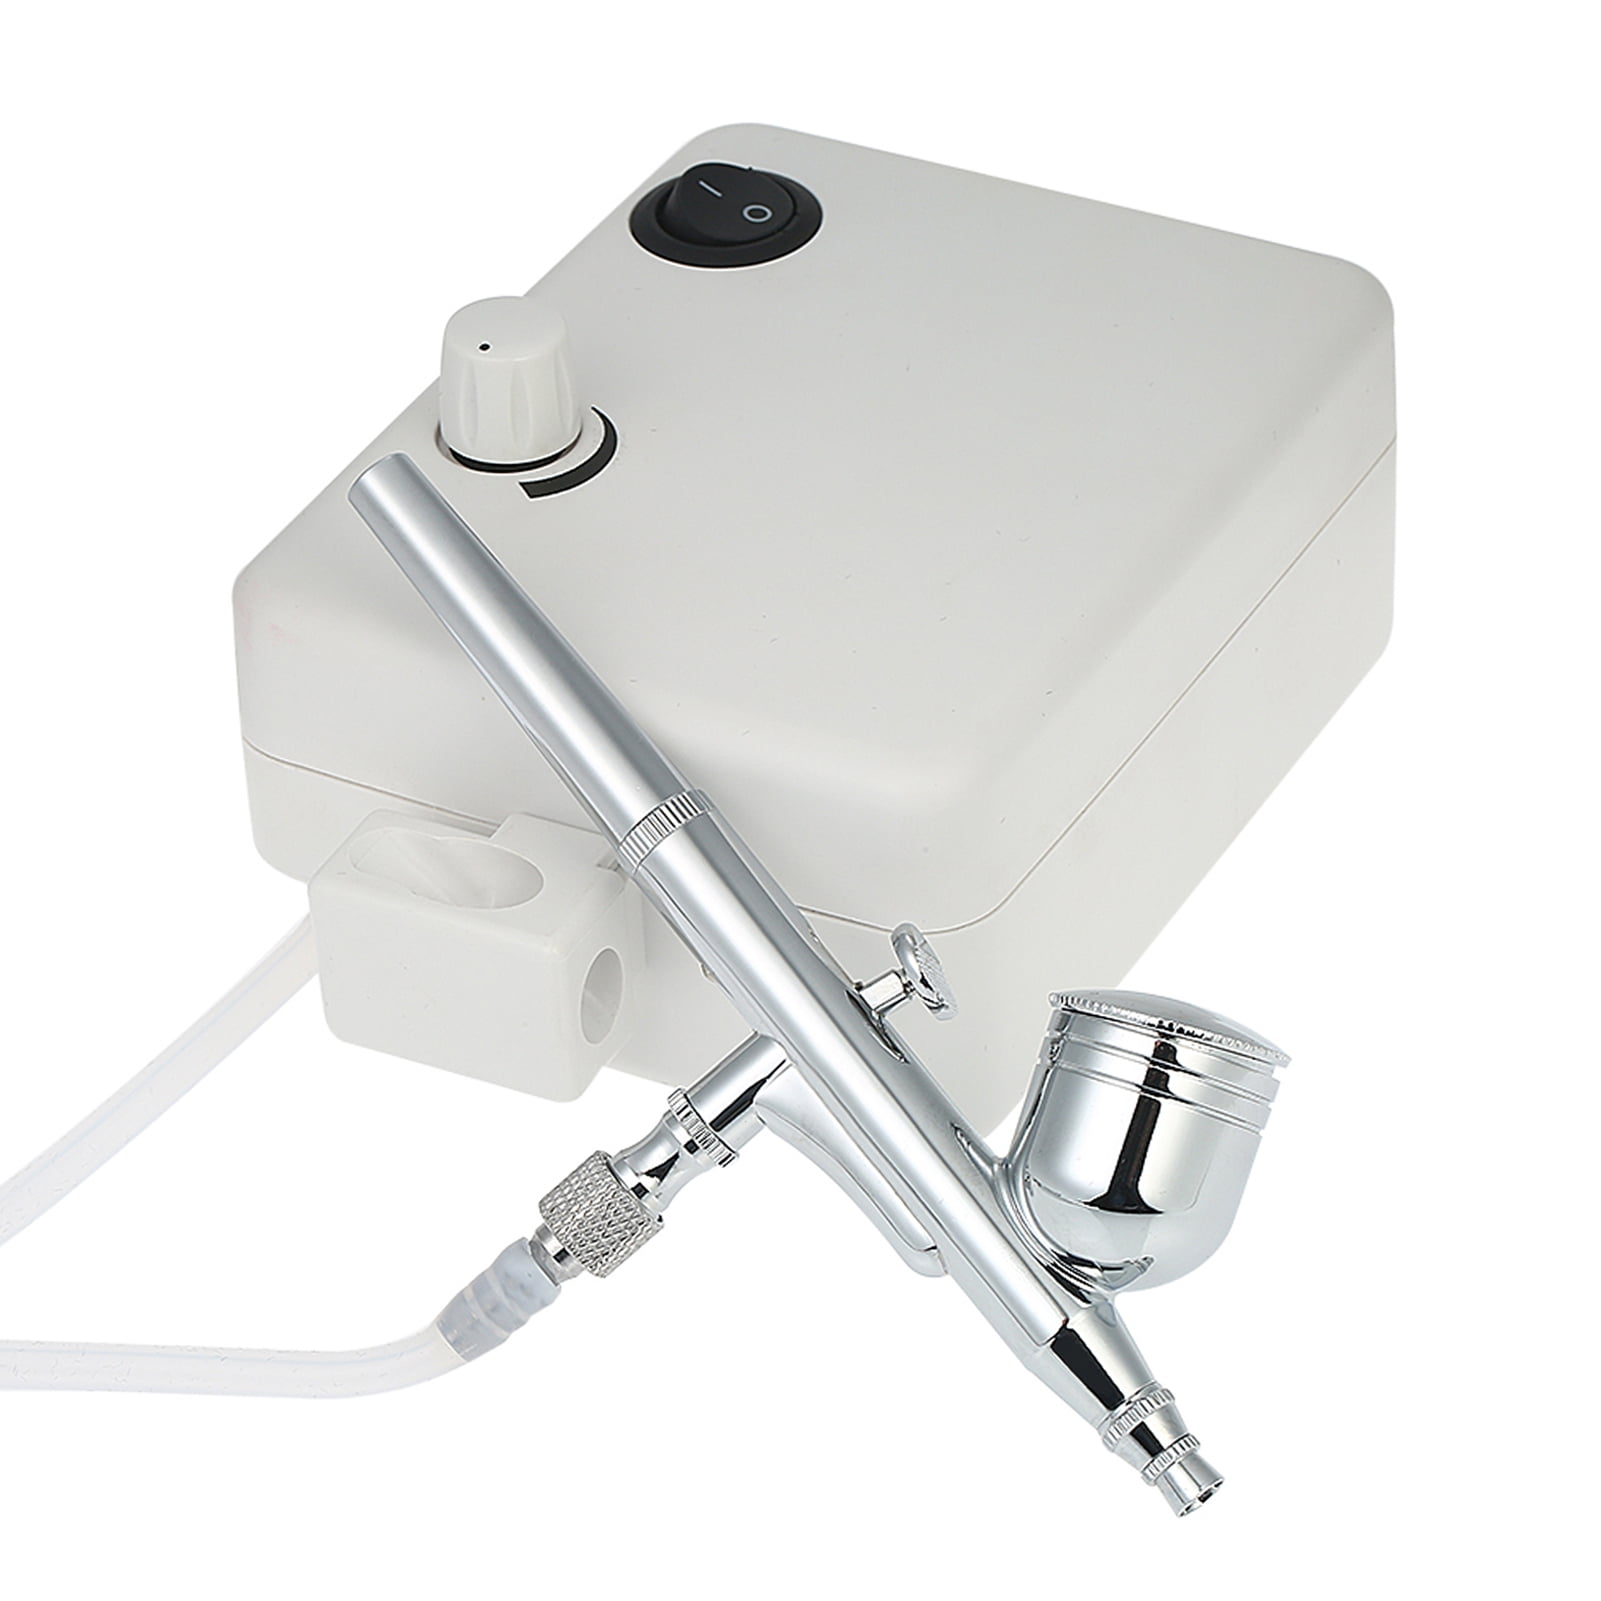 MEEDEN Mini Airbrush Kit with Compressor, Dual-Action